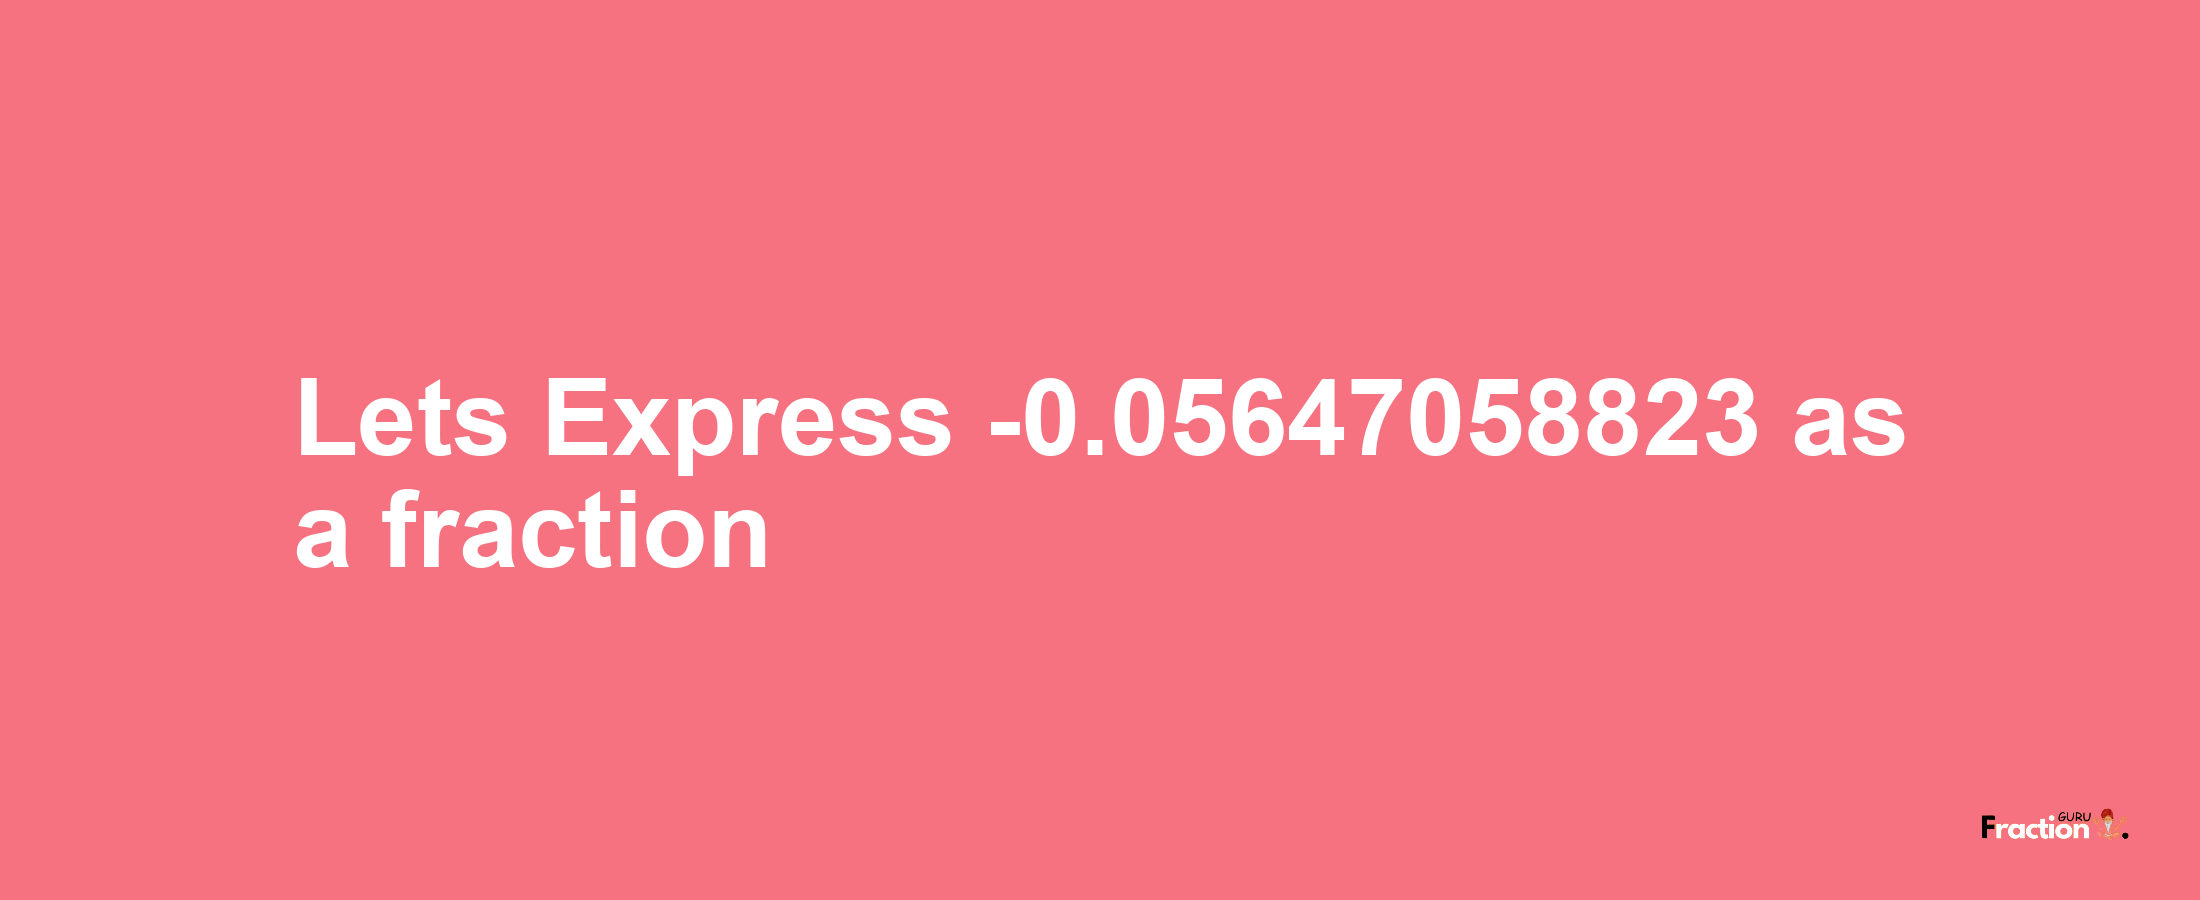 Lets Express -0.05647058823 as afraction